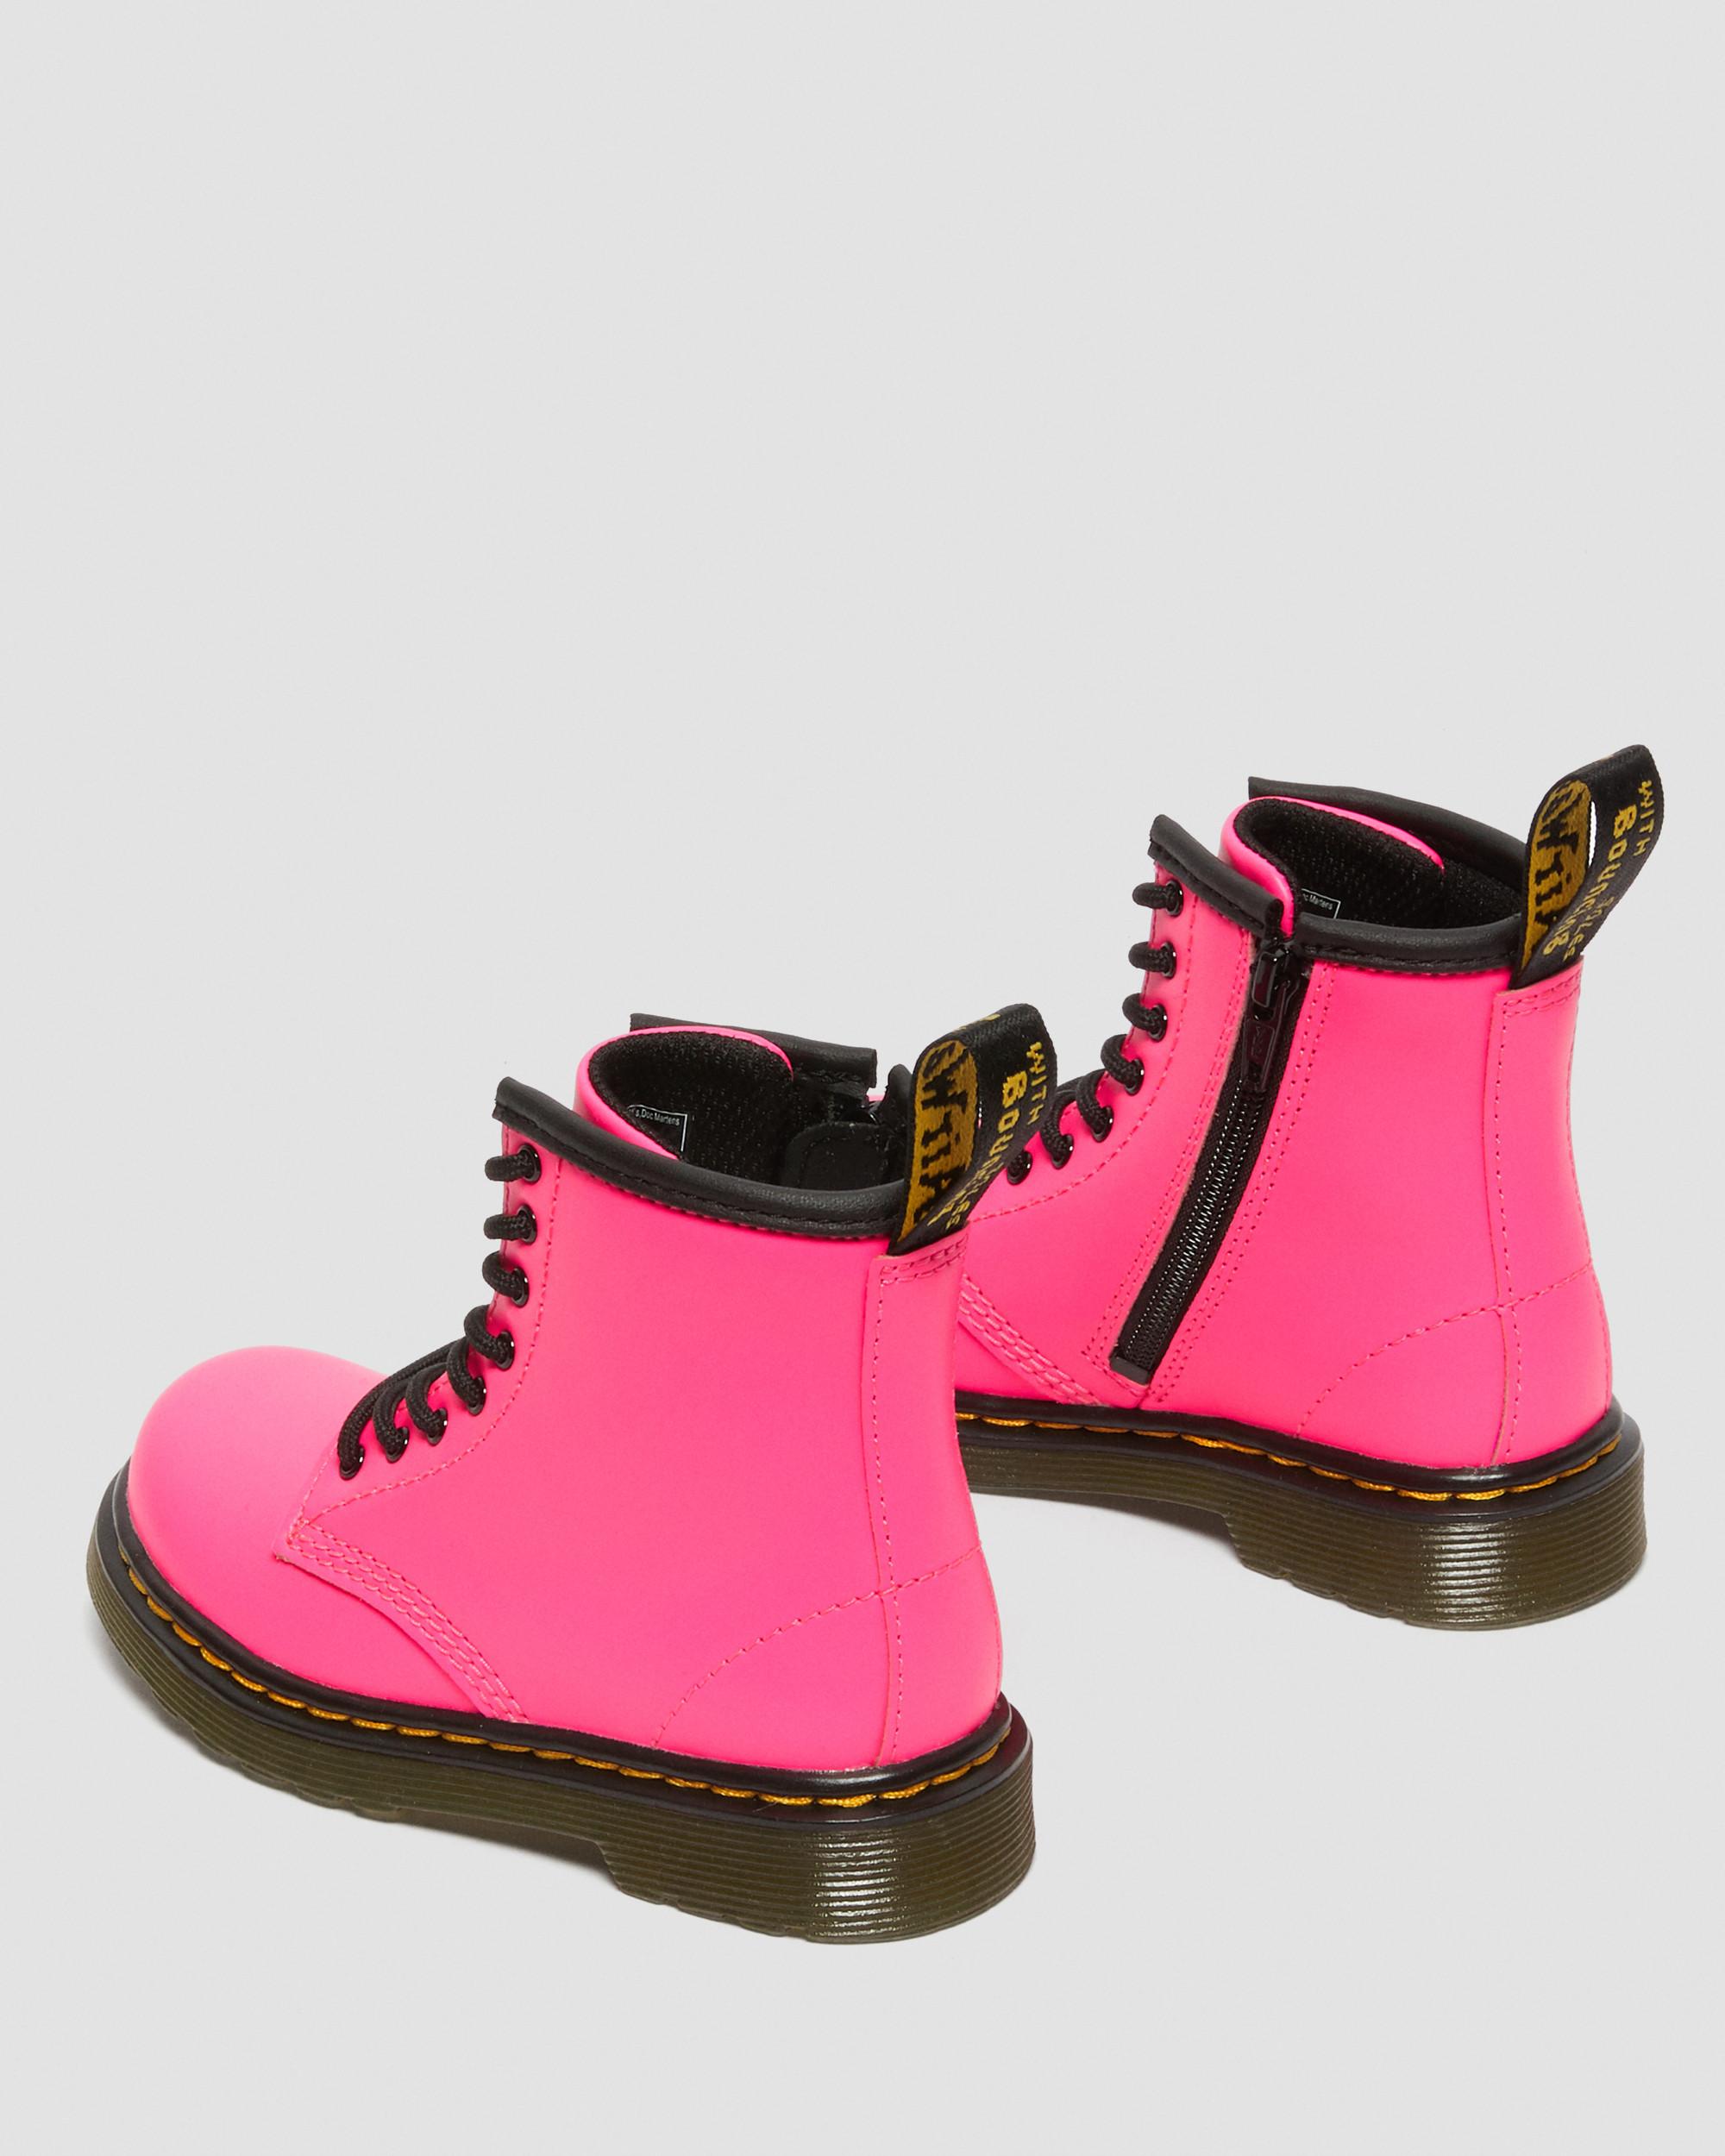 Toddler 1460 Softy T Leather Lace Up Boots in Pink